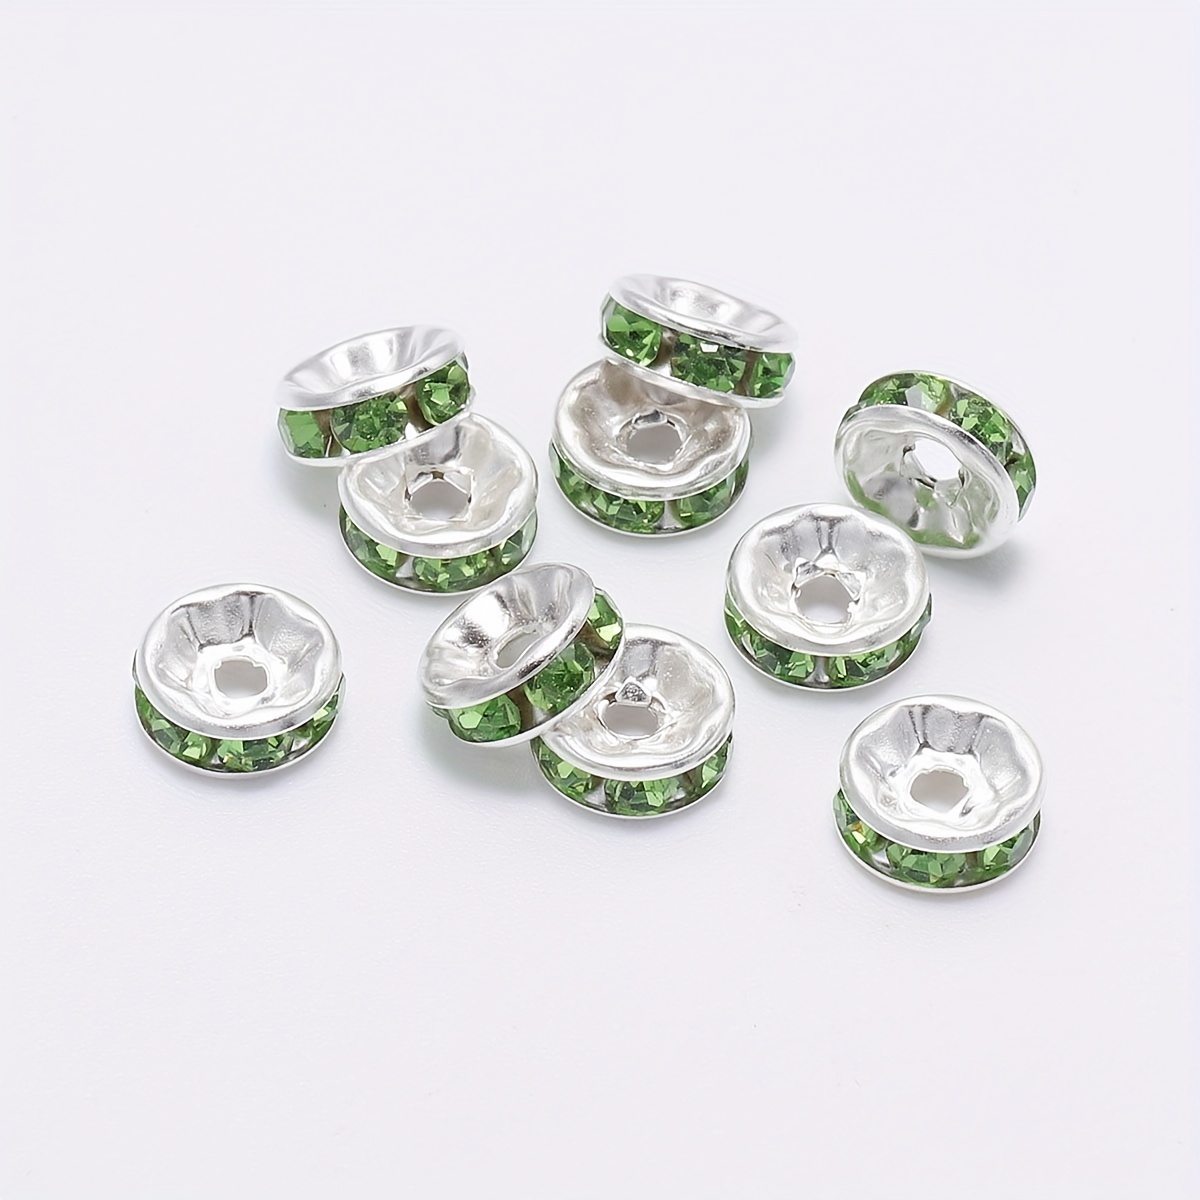 Rhinestone Spacer Beads, 8mm Silver Plated Donut Shaped Beads with Gra –  Small Devotions